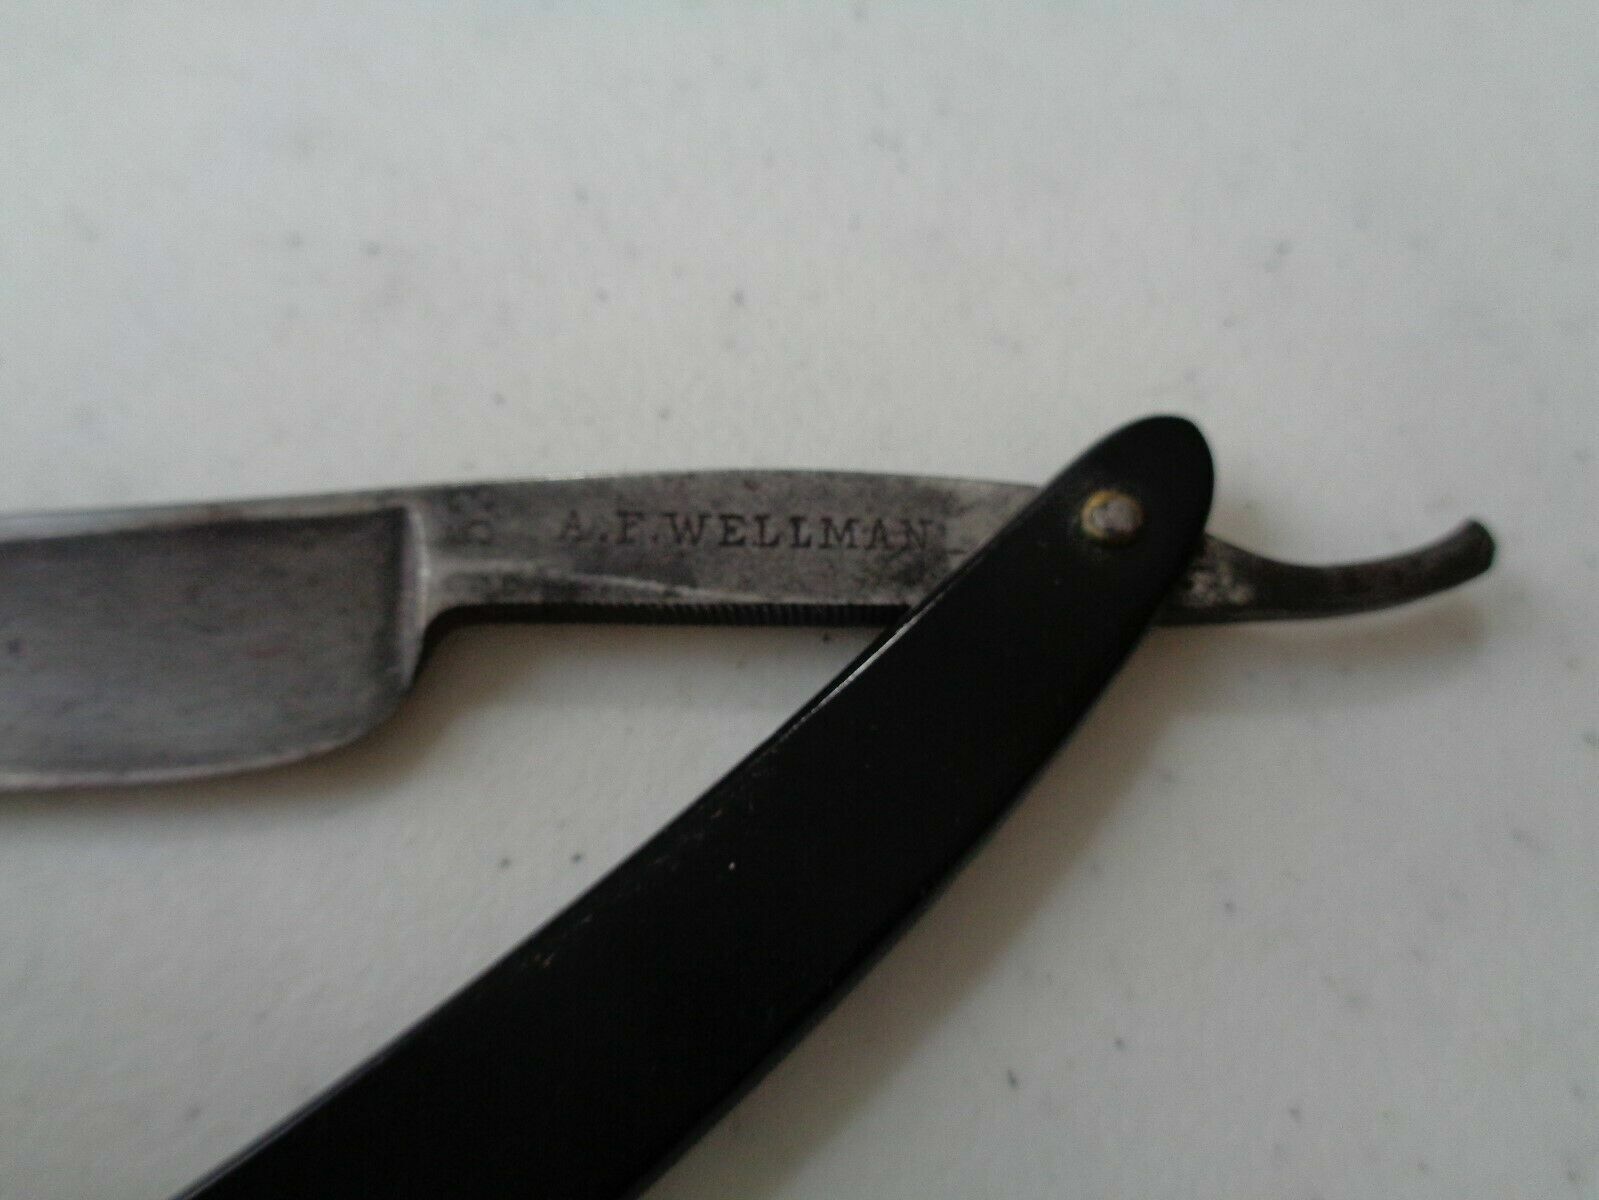 Vintage A.F. Wellman No. 53 Straight Razor Made In Germany Antique Rare